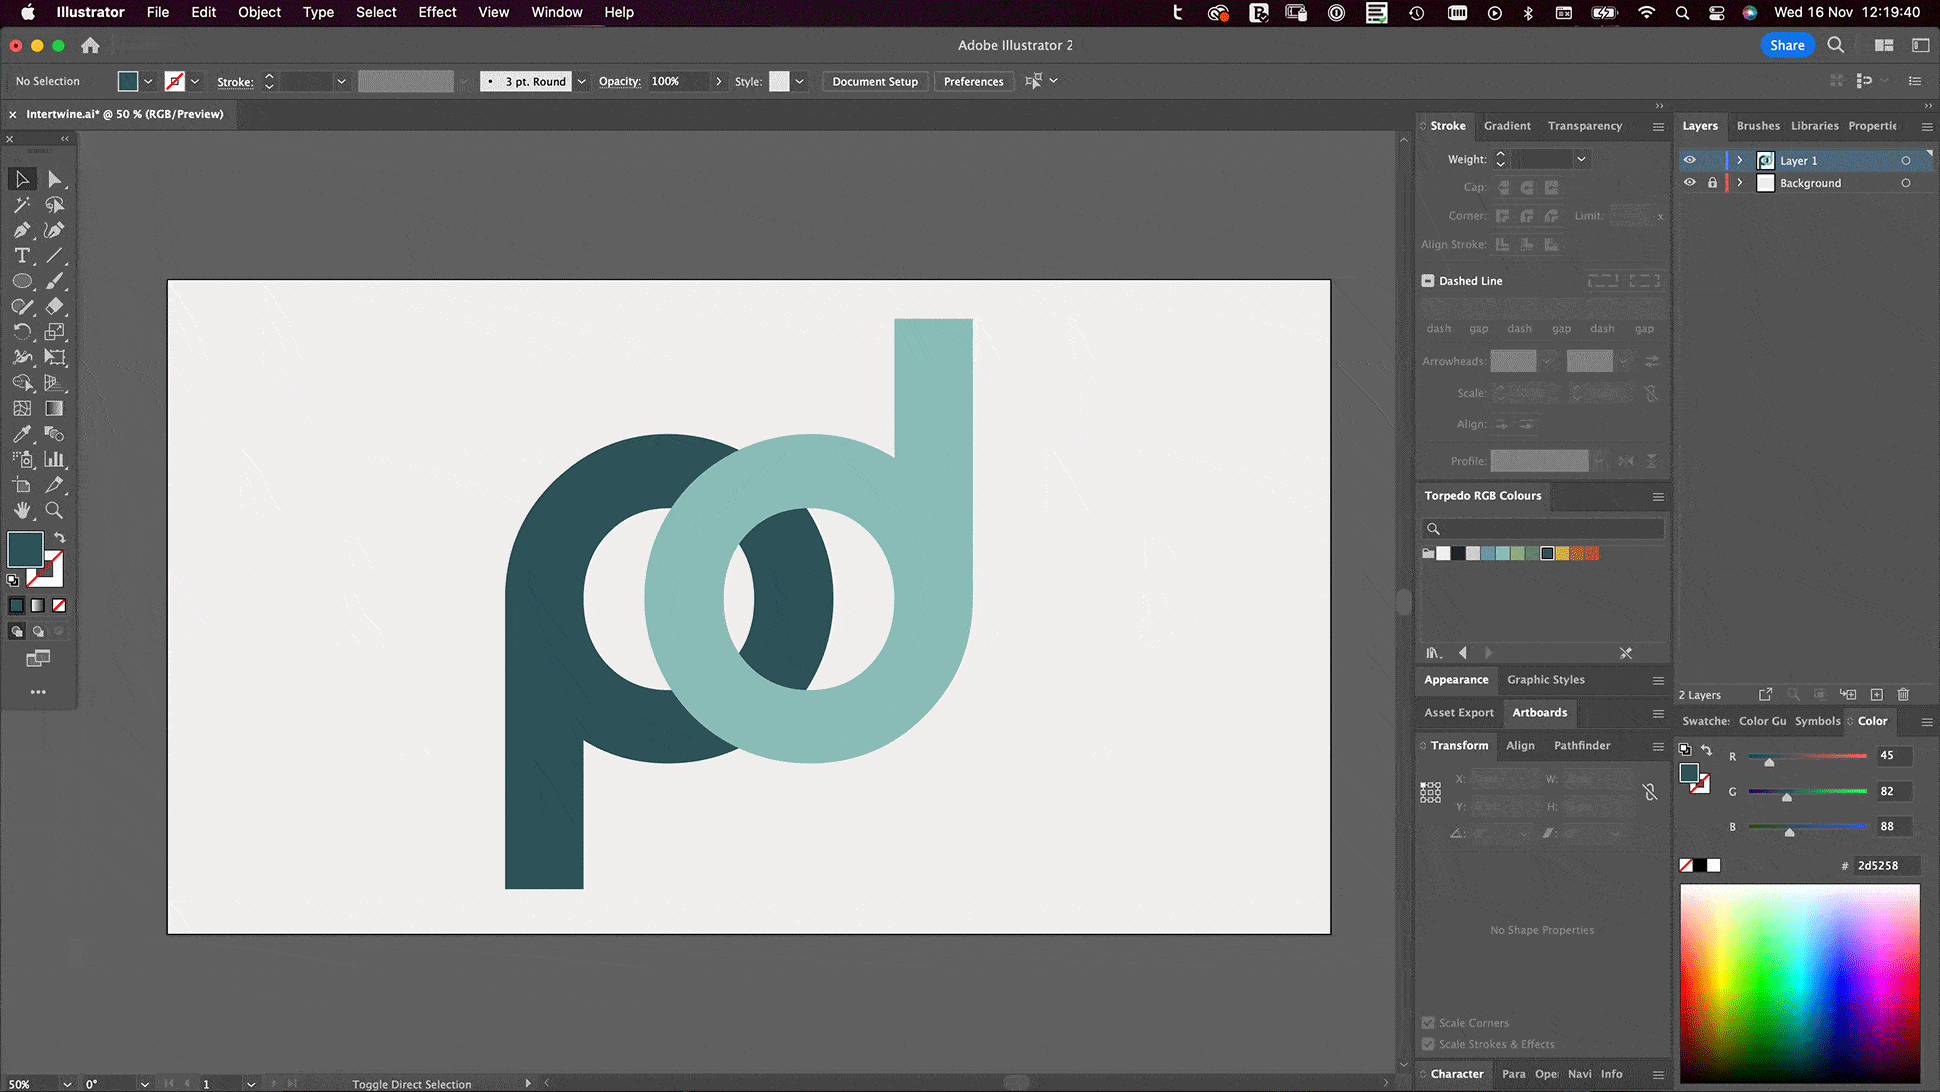 Image of 2 letters, used to show how Adobe Ilustrator can intertwine the letters using AI